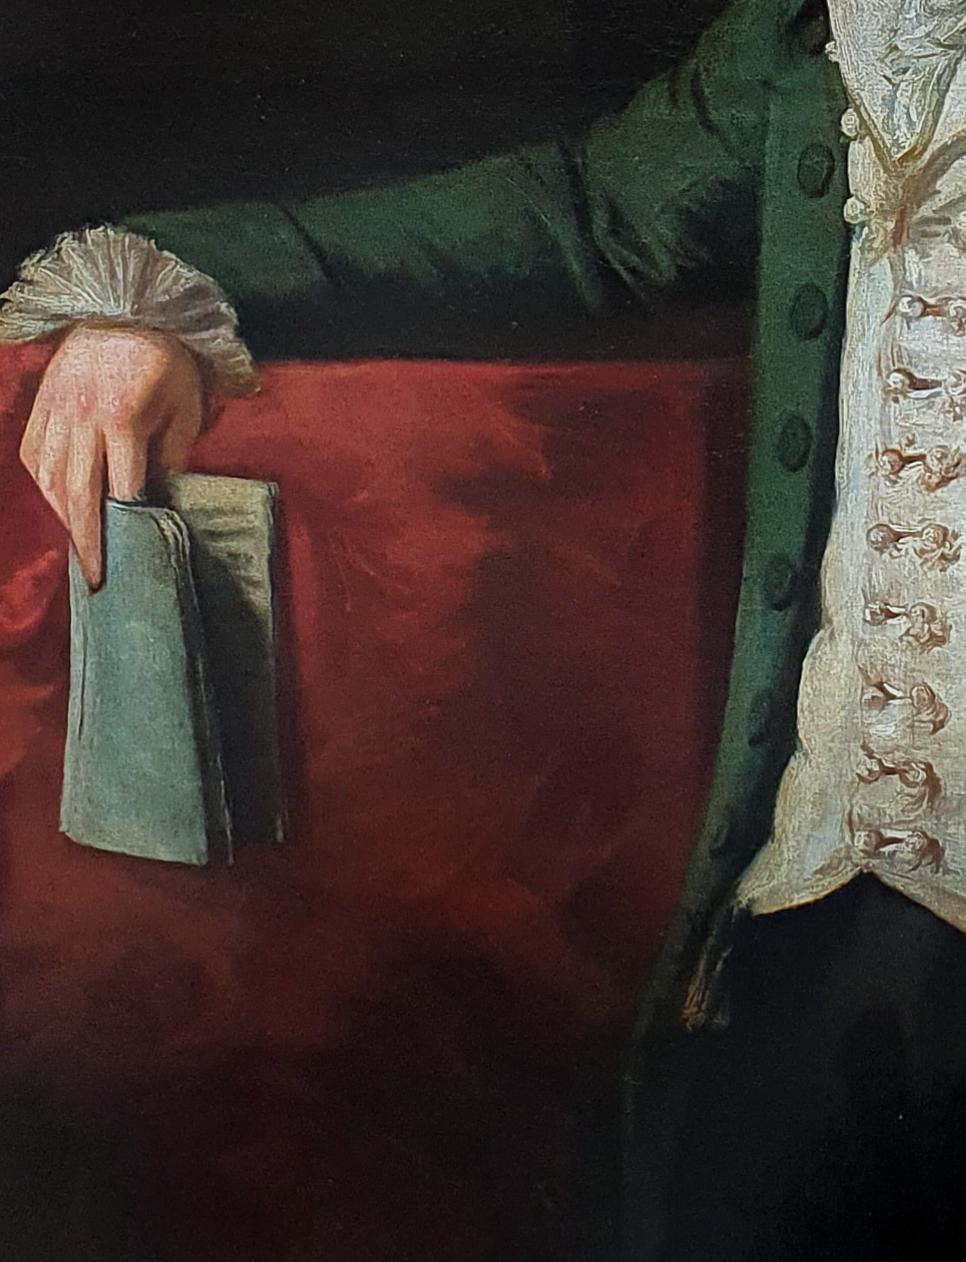 Portrait of a Gentleman c.1780
Attributed to Mason Chamberlain R.A. (1727-1787)

This portrait hung in Kirtlington Park, Oxfordshire, the family seat of the Dashwood family for almost 200 years.  The dining room was widely regarded as one of the